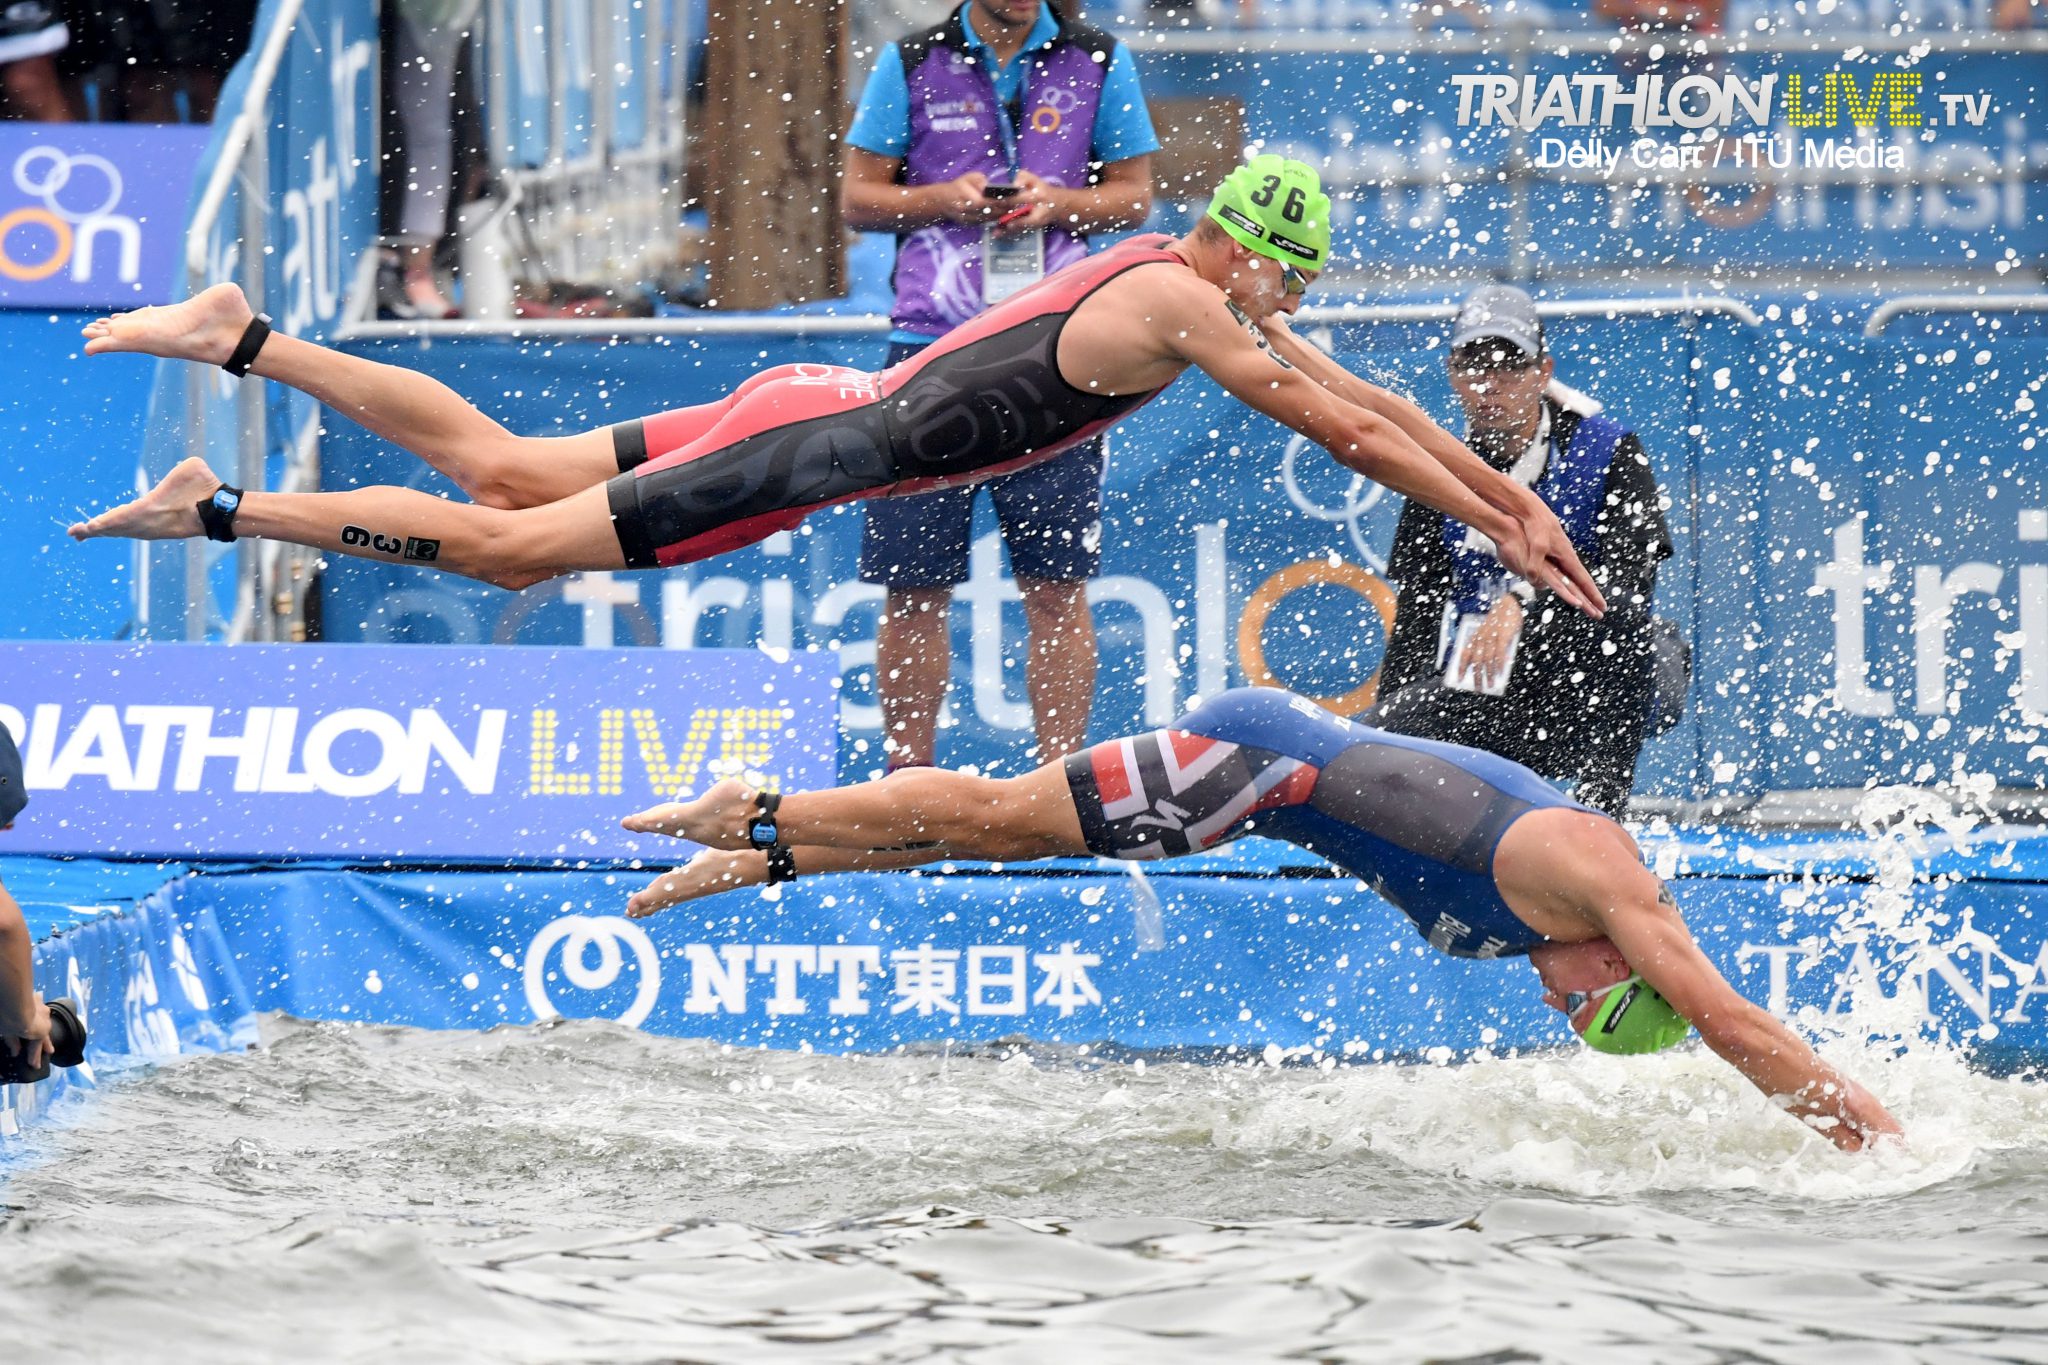 How (and when) to watch the Olympic triathlon events Triathlon Today